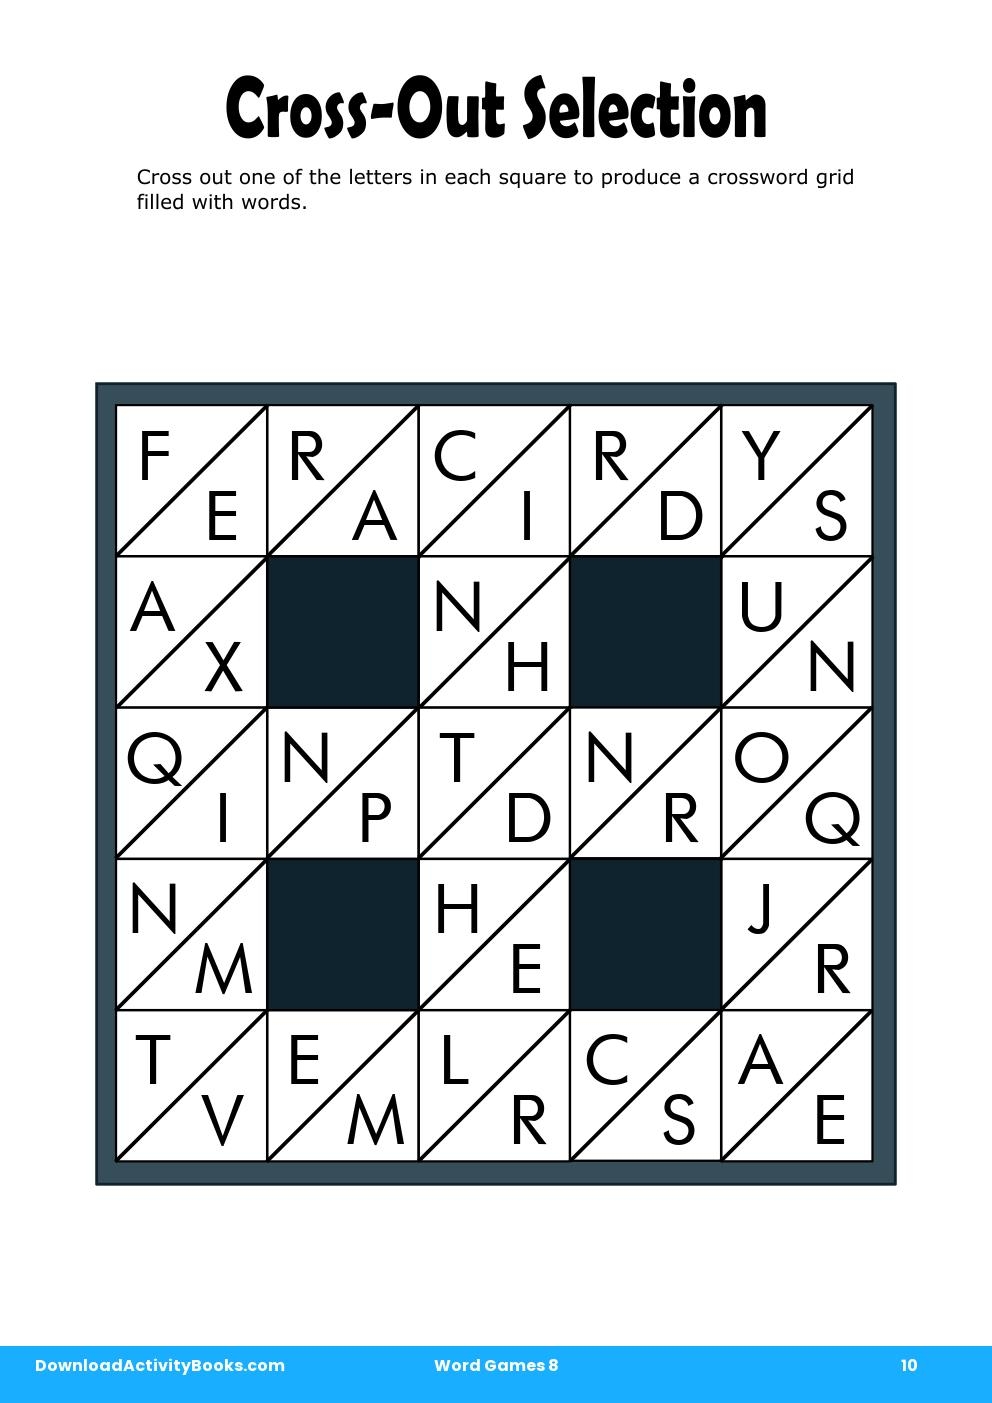 Cross-Out Selection in Word Games 8